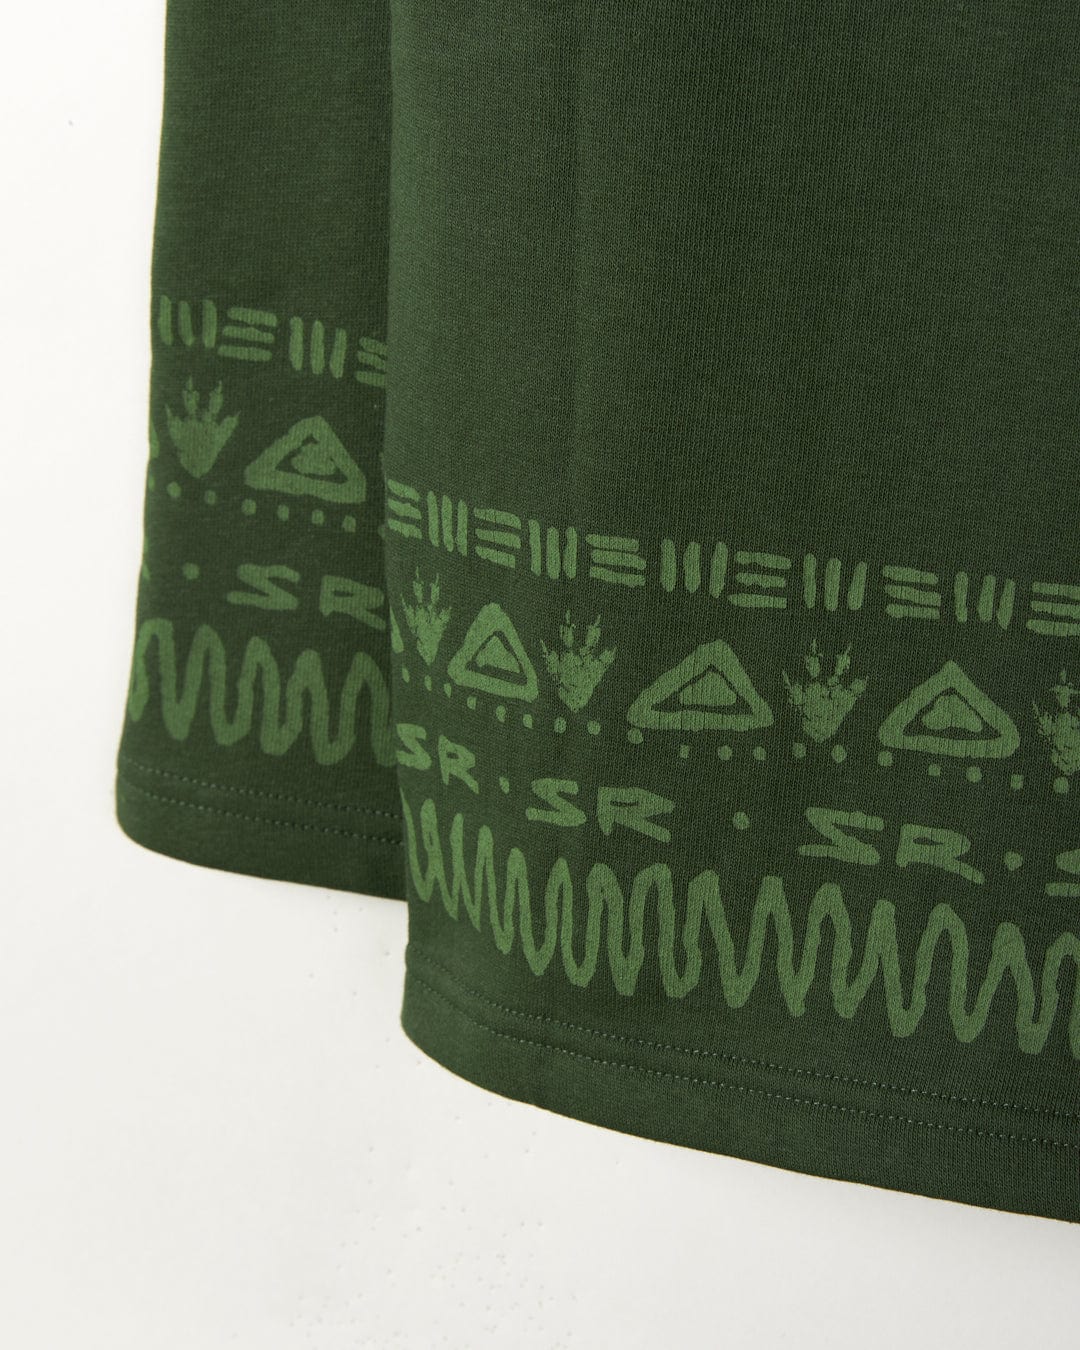 Close-up of a Back in the Day - Recycled Kids Pop Hoodie - Dark Green fabric with Aztec-inspired patterns in a lighter green at the hem by Saltrock.